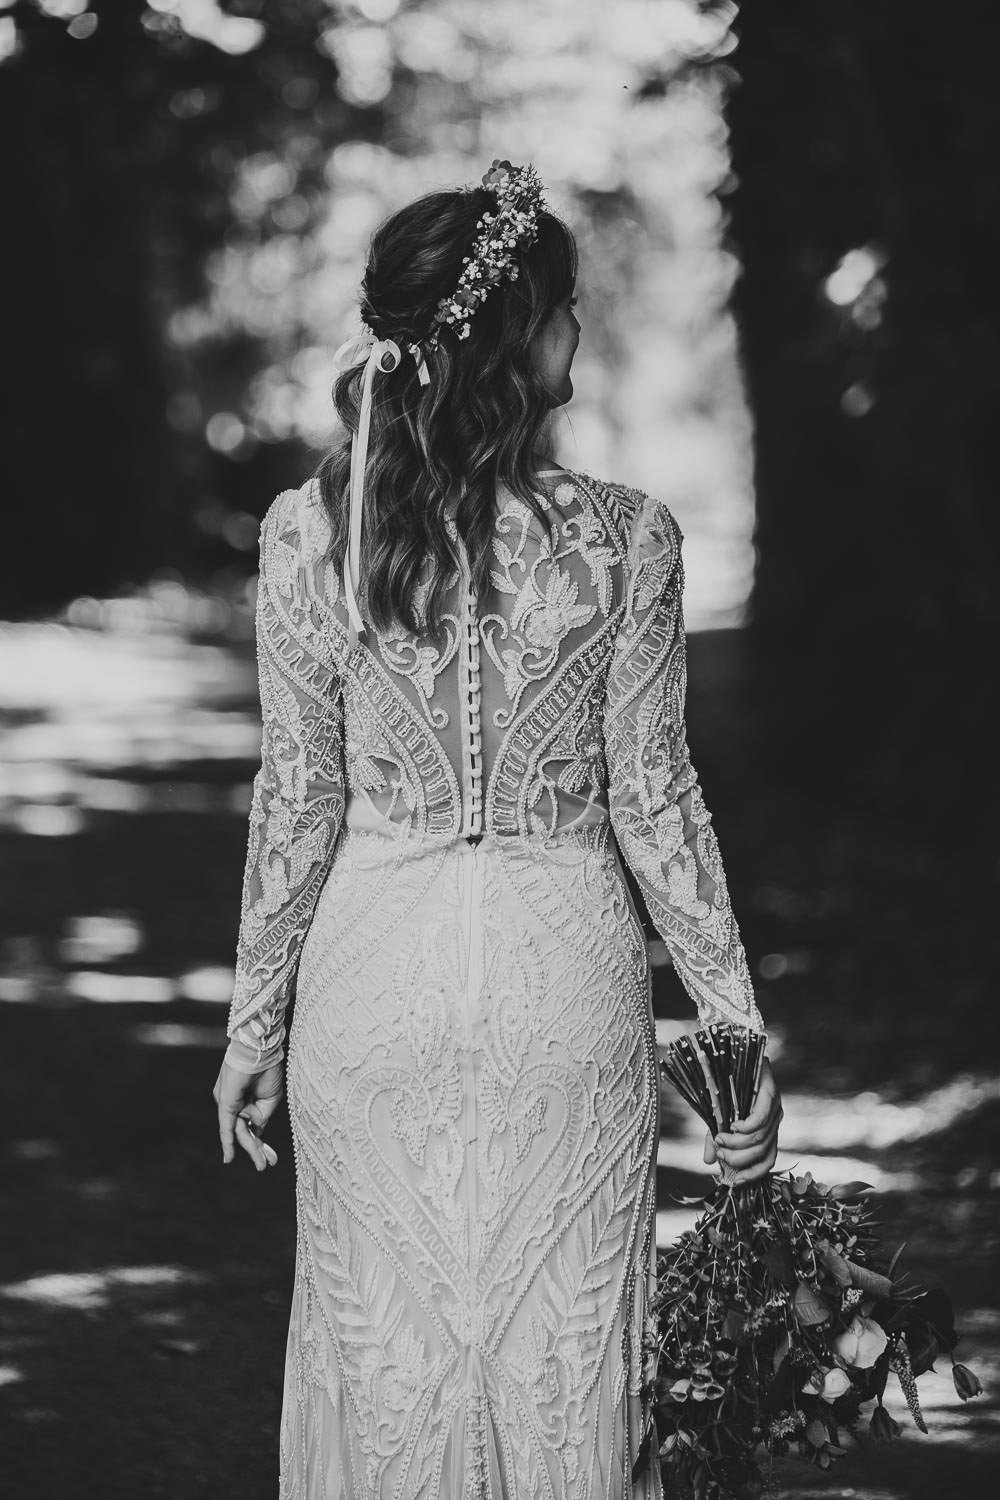 Bride wearing lace dress and crown of flowers